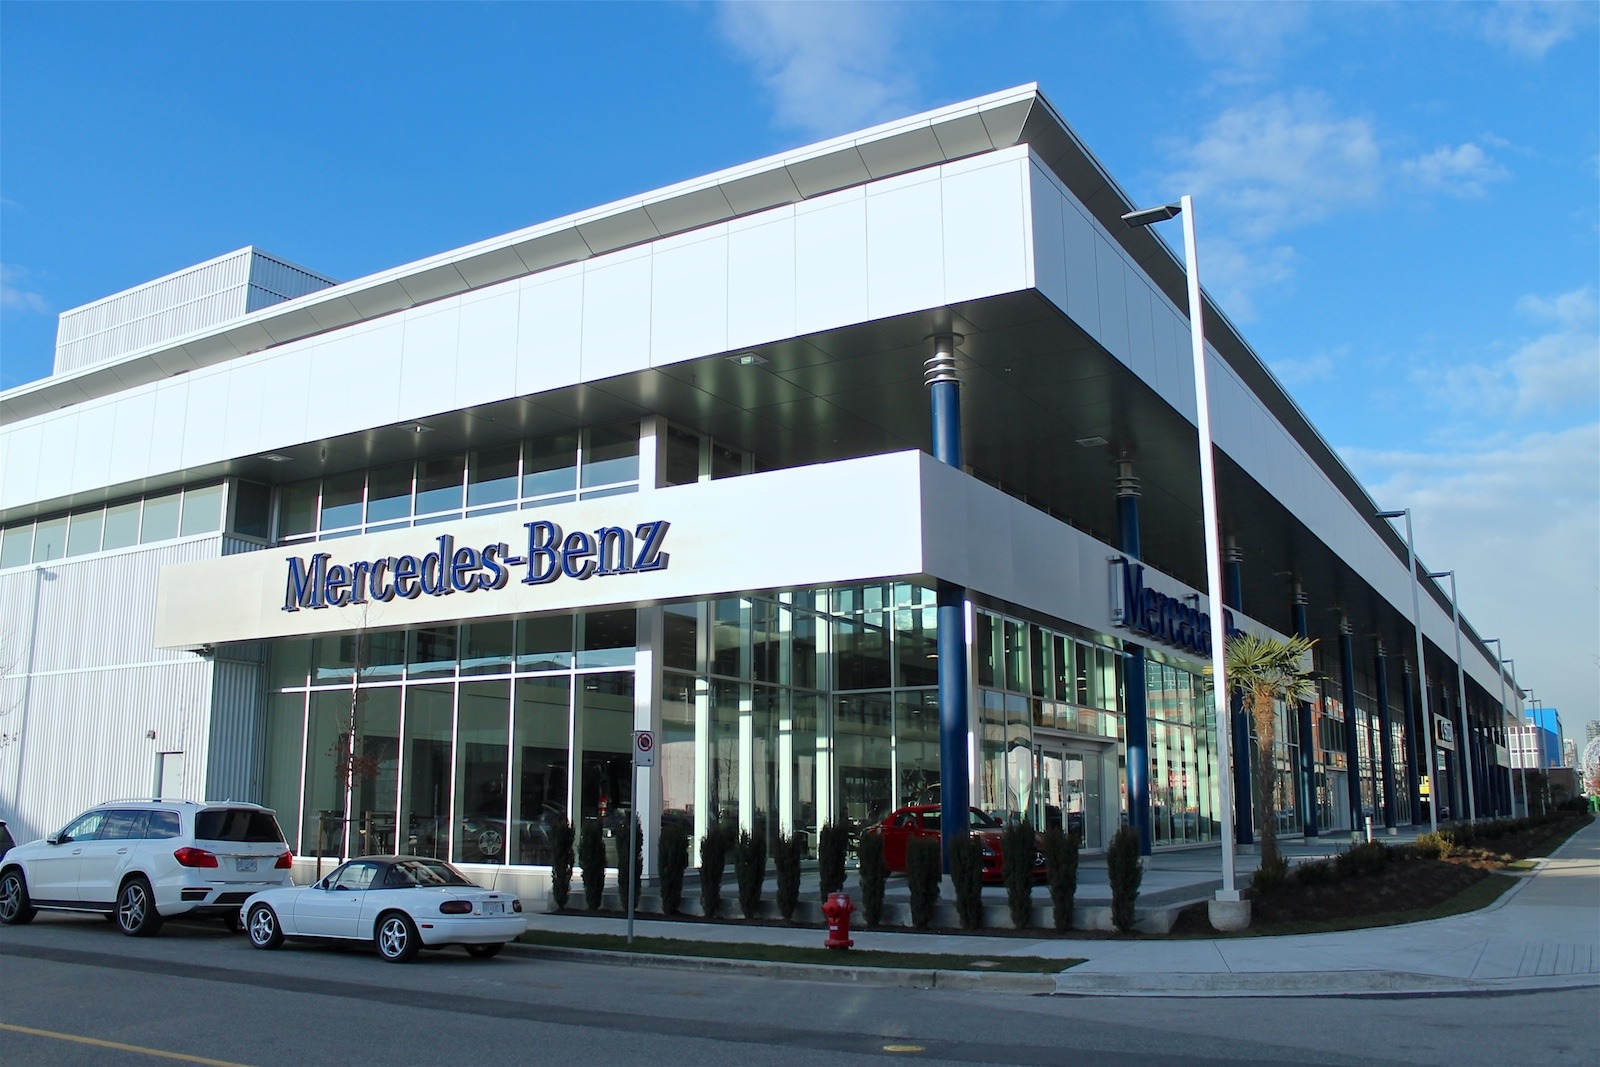 Robertson-Walls-Ceilings-Completed-Projects-Luxury-Car-Dealerships-Mercedes-Benz-Vancouver-1 Completed Projects